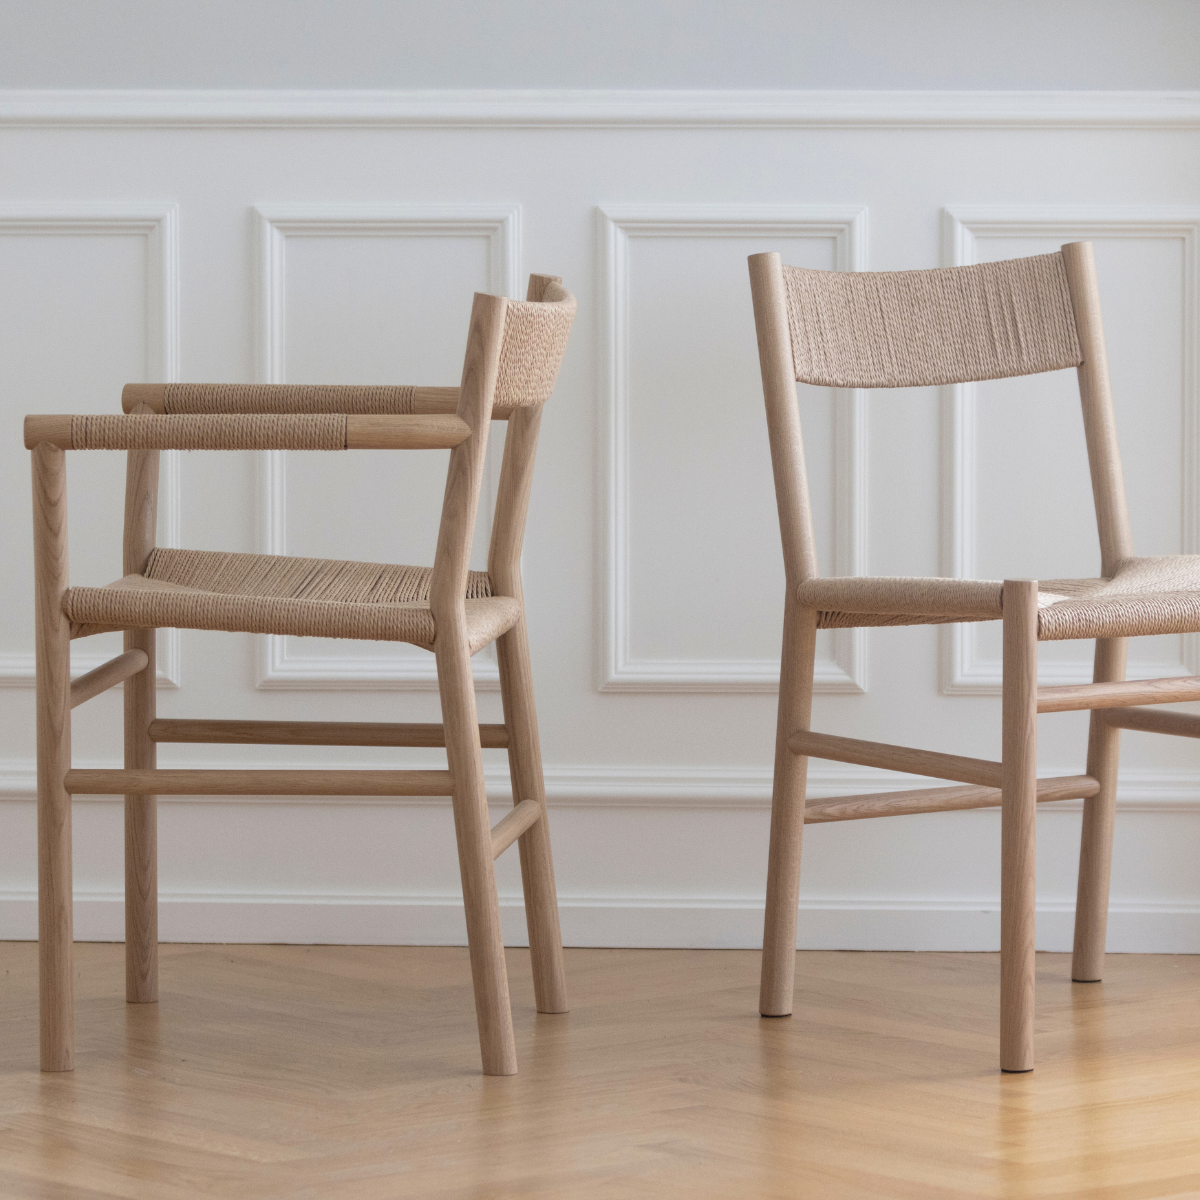 CORD - Oak chair with armrests